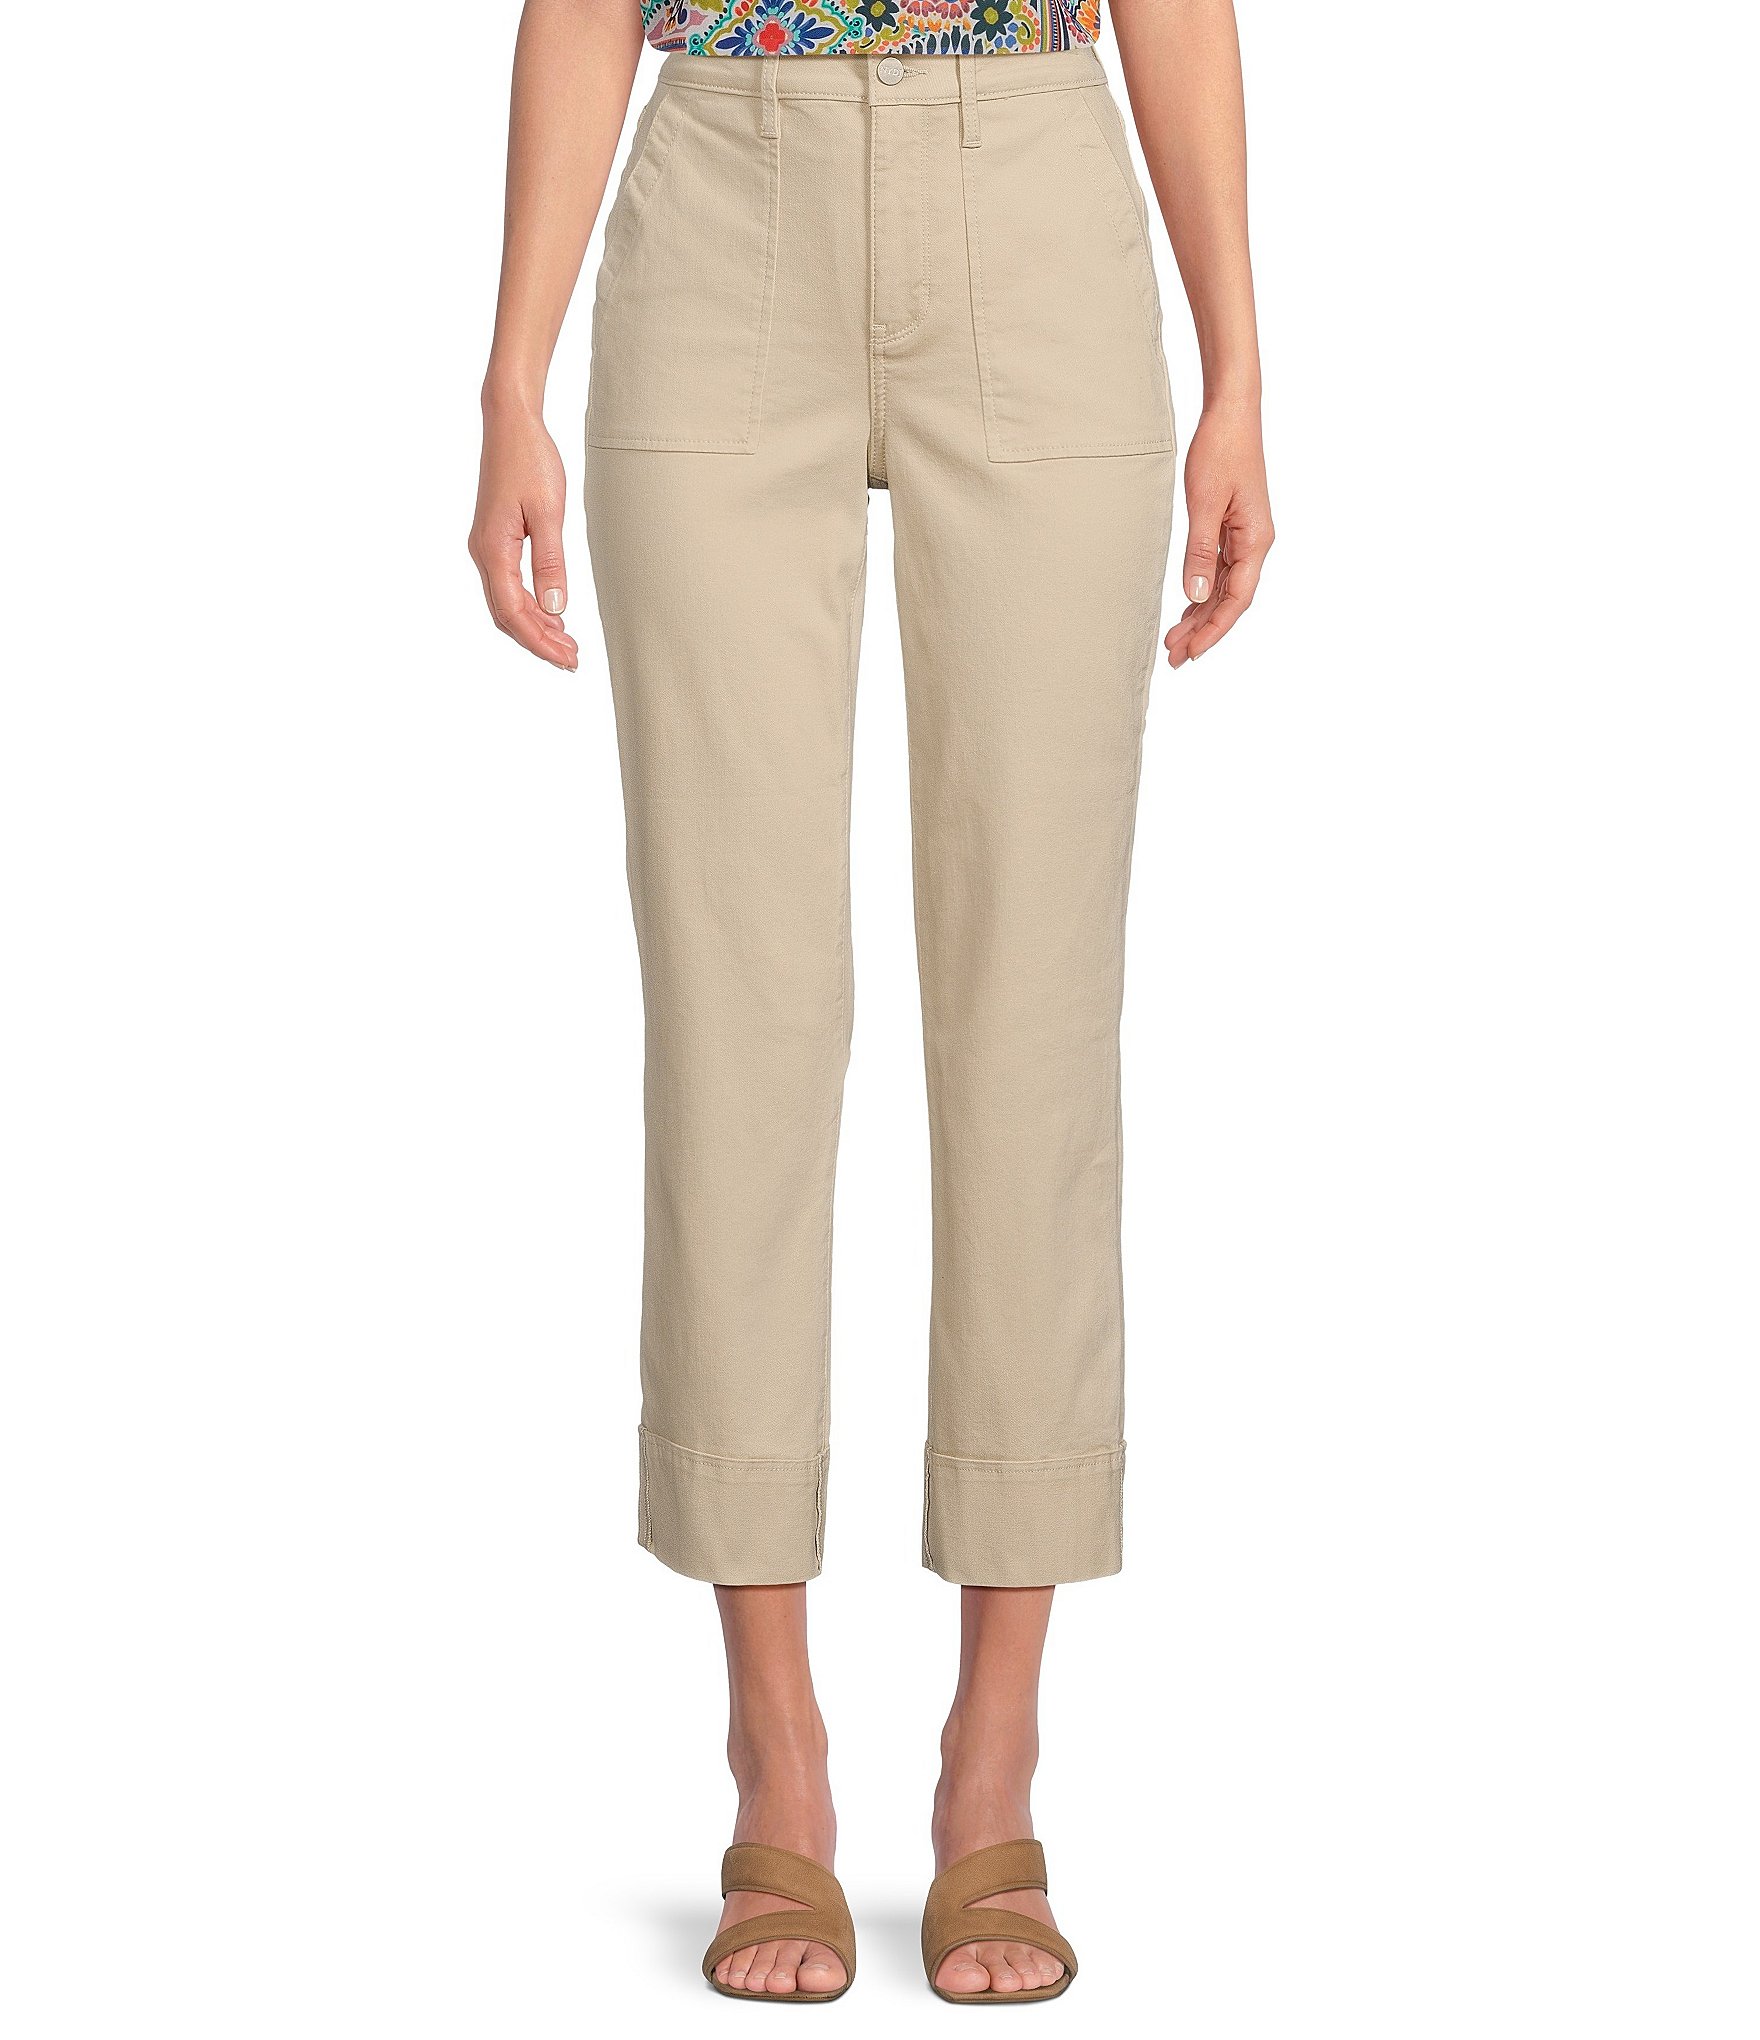 high waisted pants: Women's Petite Clothing